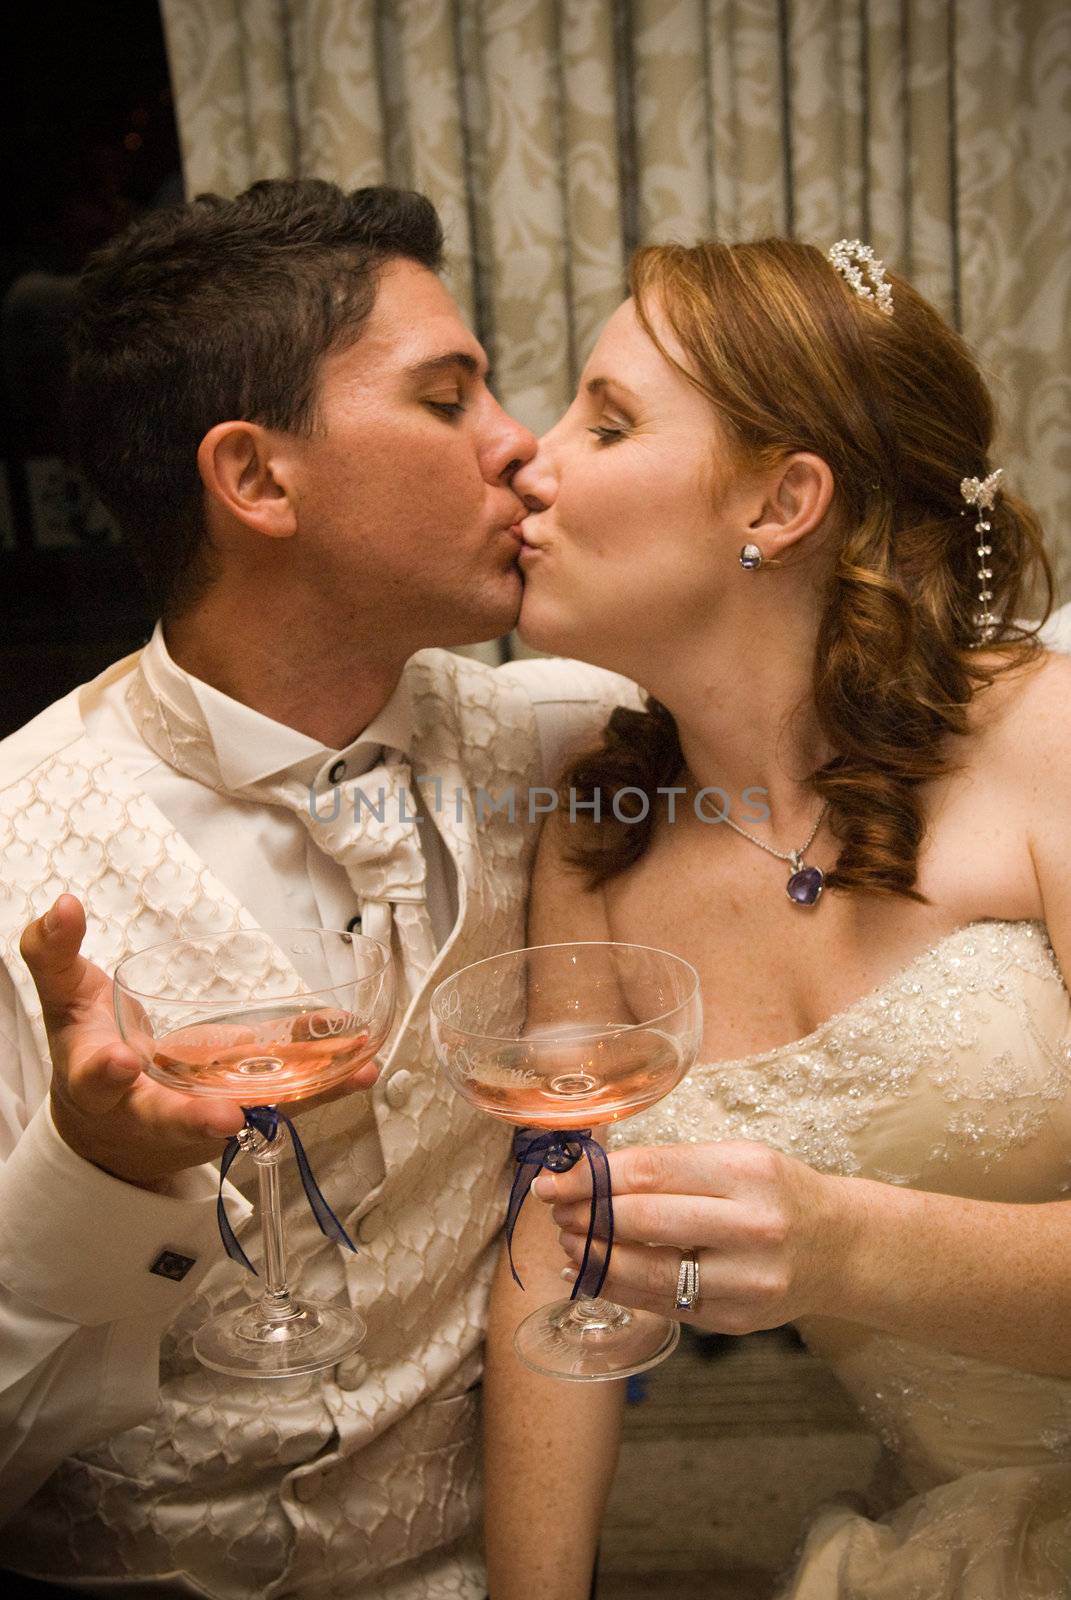 sexy beautiful young bridal couple kissing and holding champagne glasses together